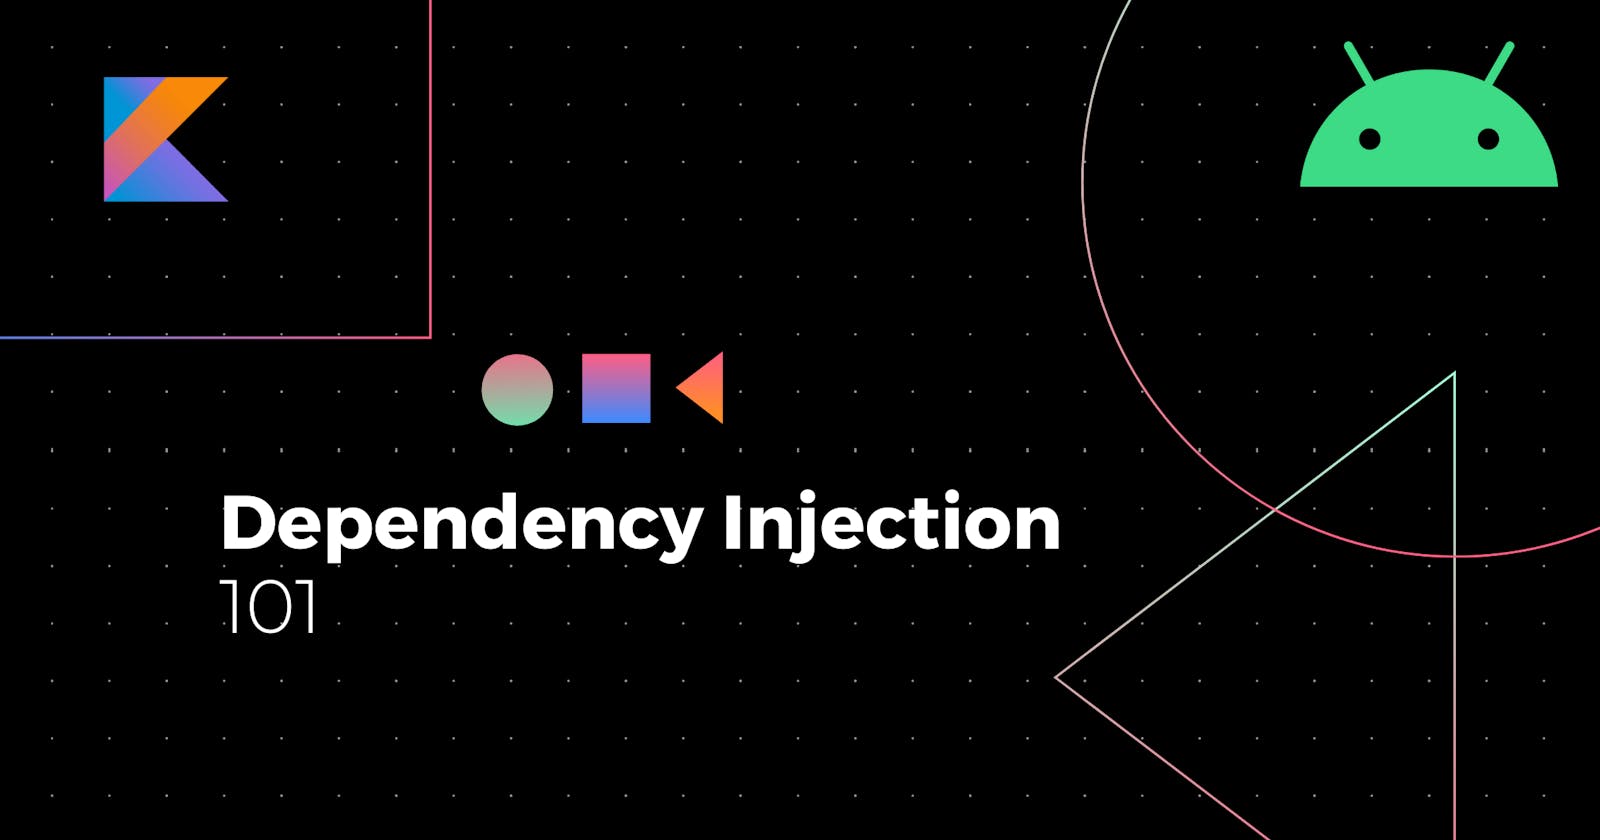 What is Dependency Injection? Why do we need it?